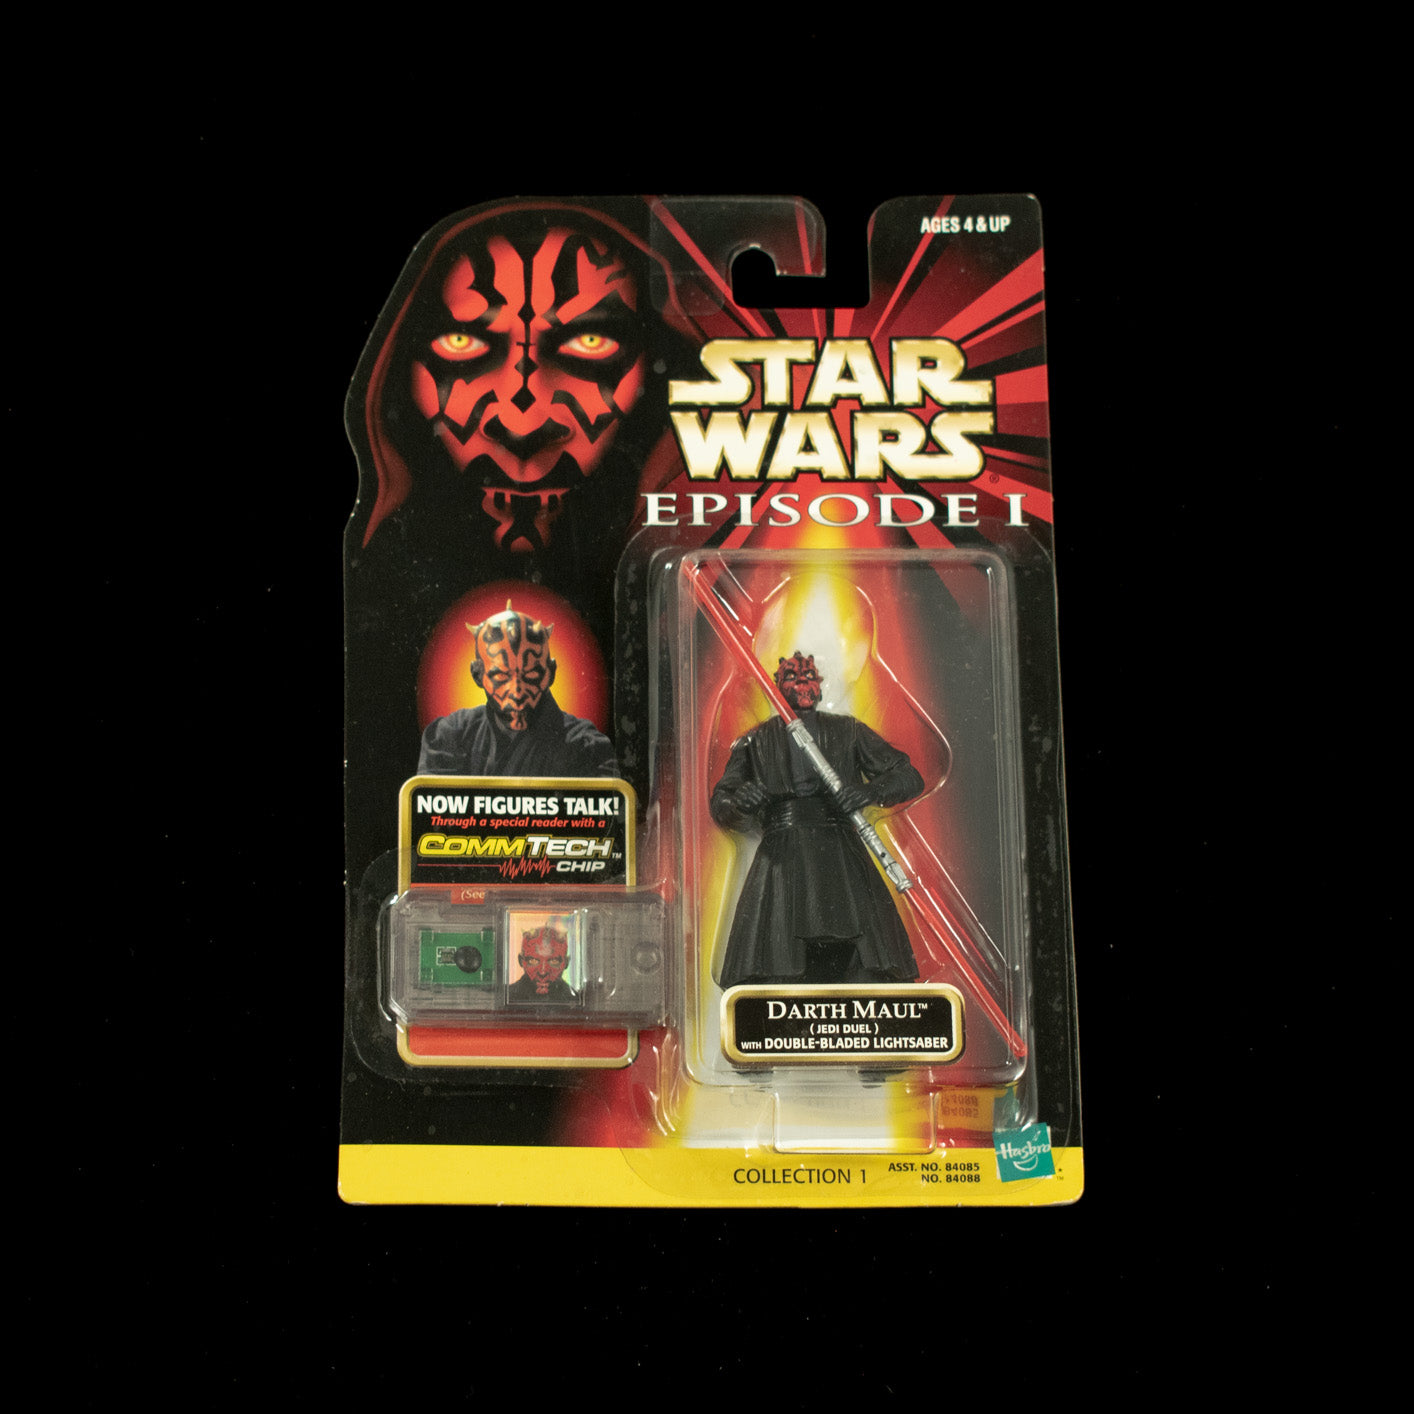 Star Wars Episode 1 Action Figure Darth Maul Double Bladed Lightsaber Hasbro 199